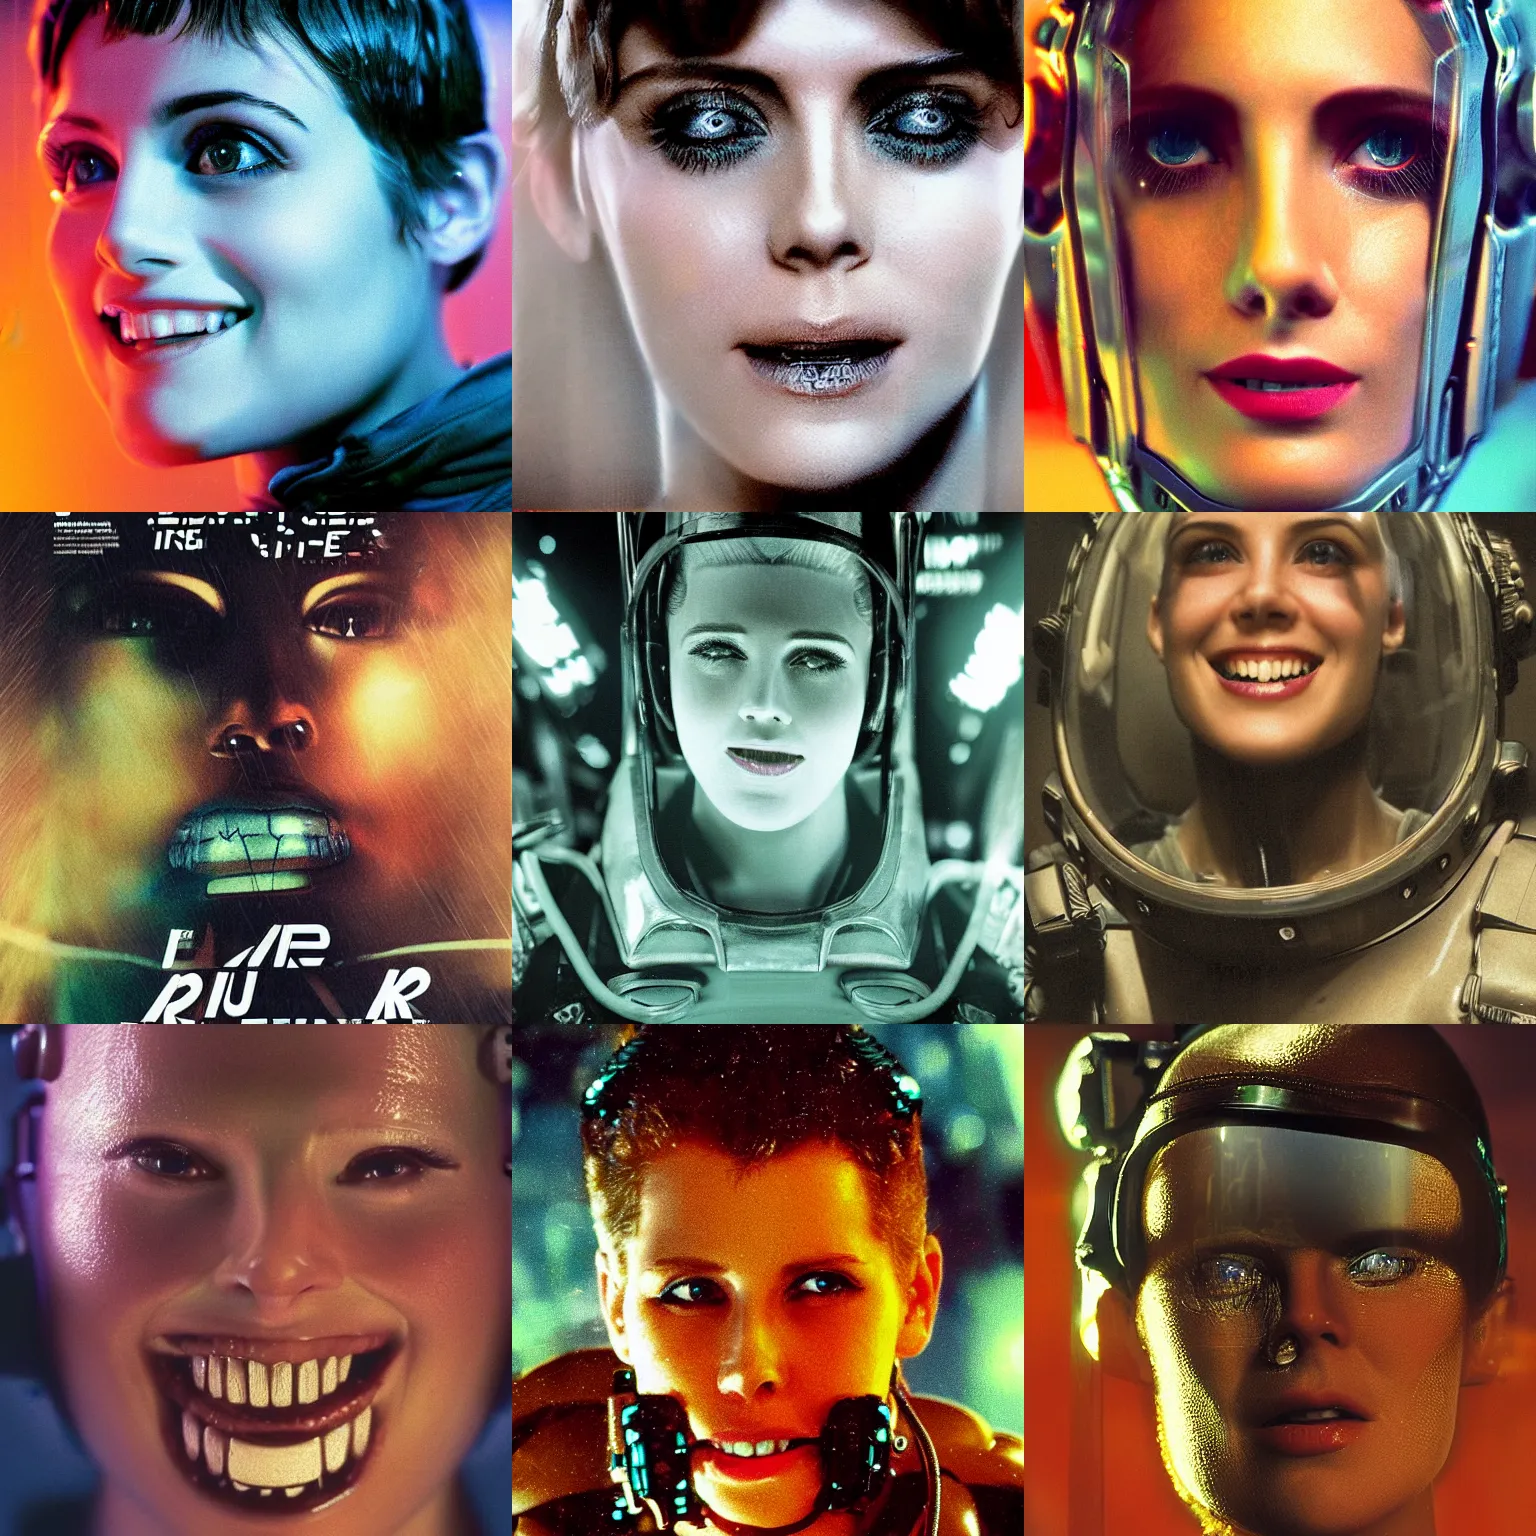 Prompt: beautiful extreme closeup portrait photo in style of 1990s frontiers in retrofuturism deep diving helmet fashion magazine blade runner edition, highly detailed, focus on smile, soft lighting